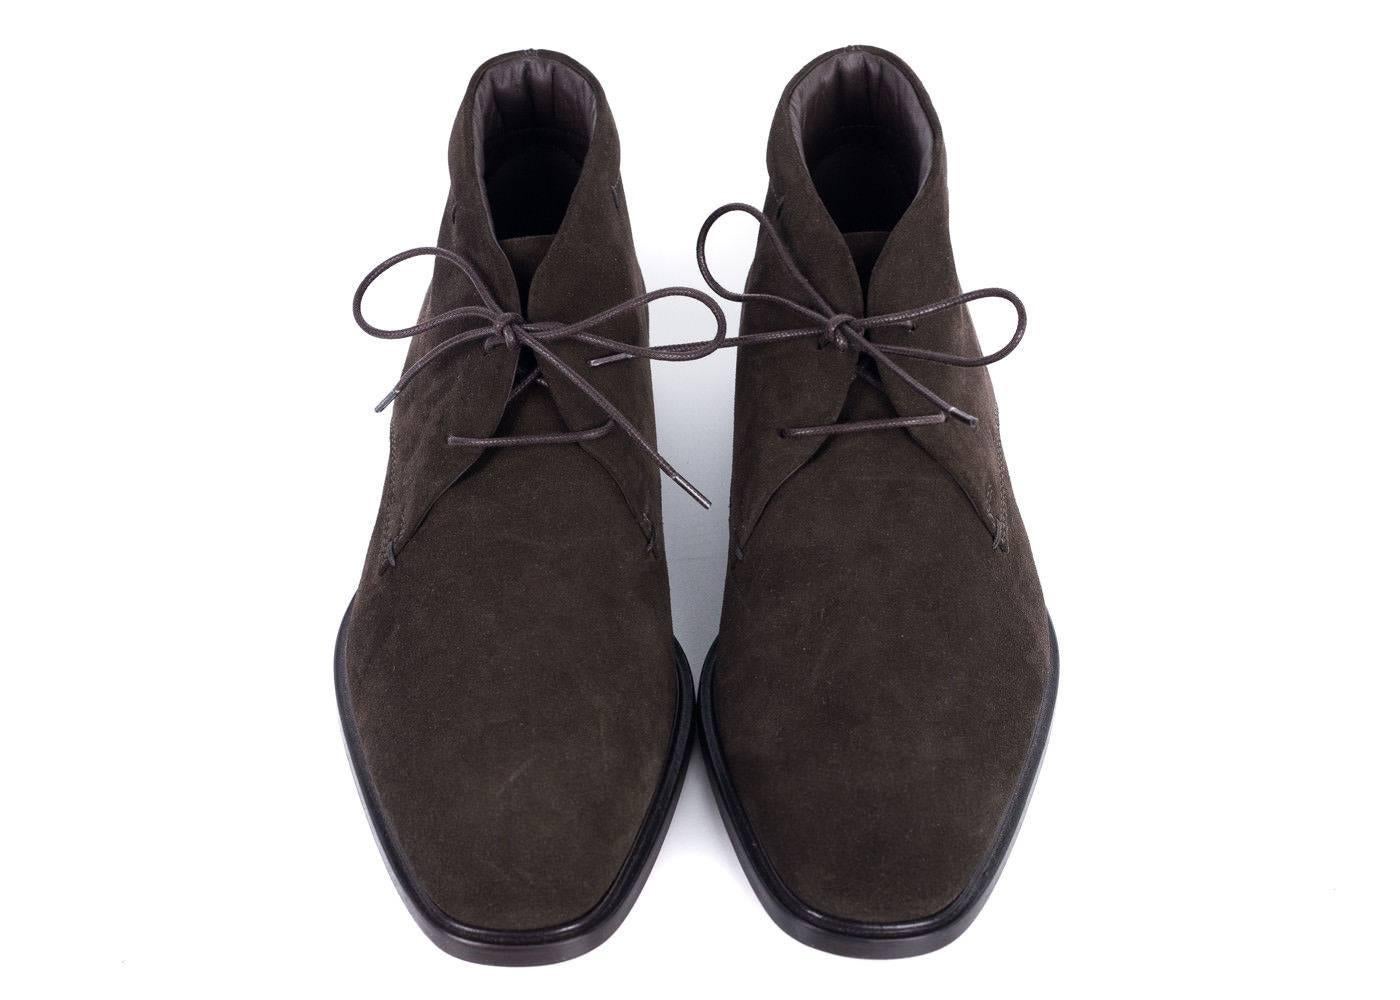 Tod's Brown Suede Ankle Boots will be the smoothest addition of the season. This shoe features Tod's signature monogram stamped logo, embossed rubber pebbles, and tonal lace up feature. You can pair these shoes with khakis or dark denim for that